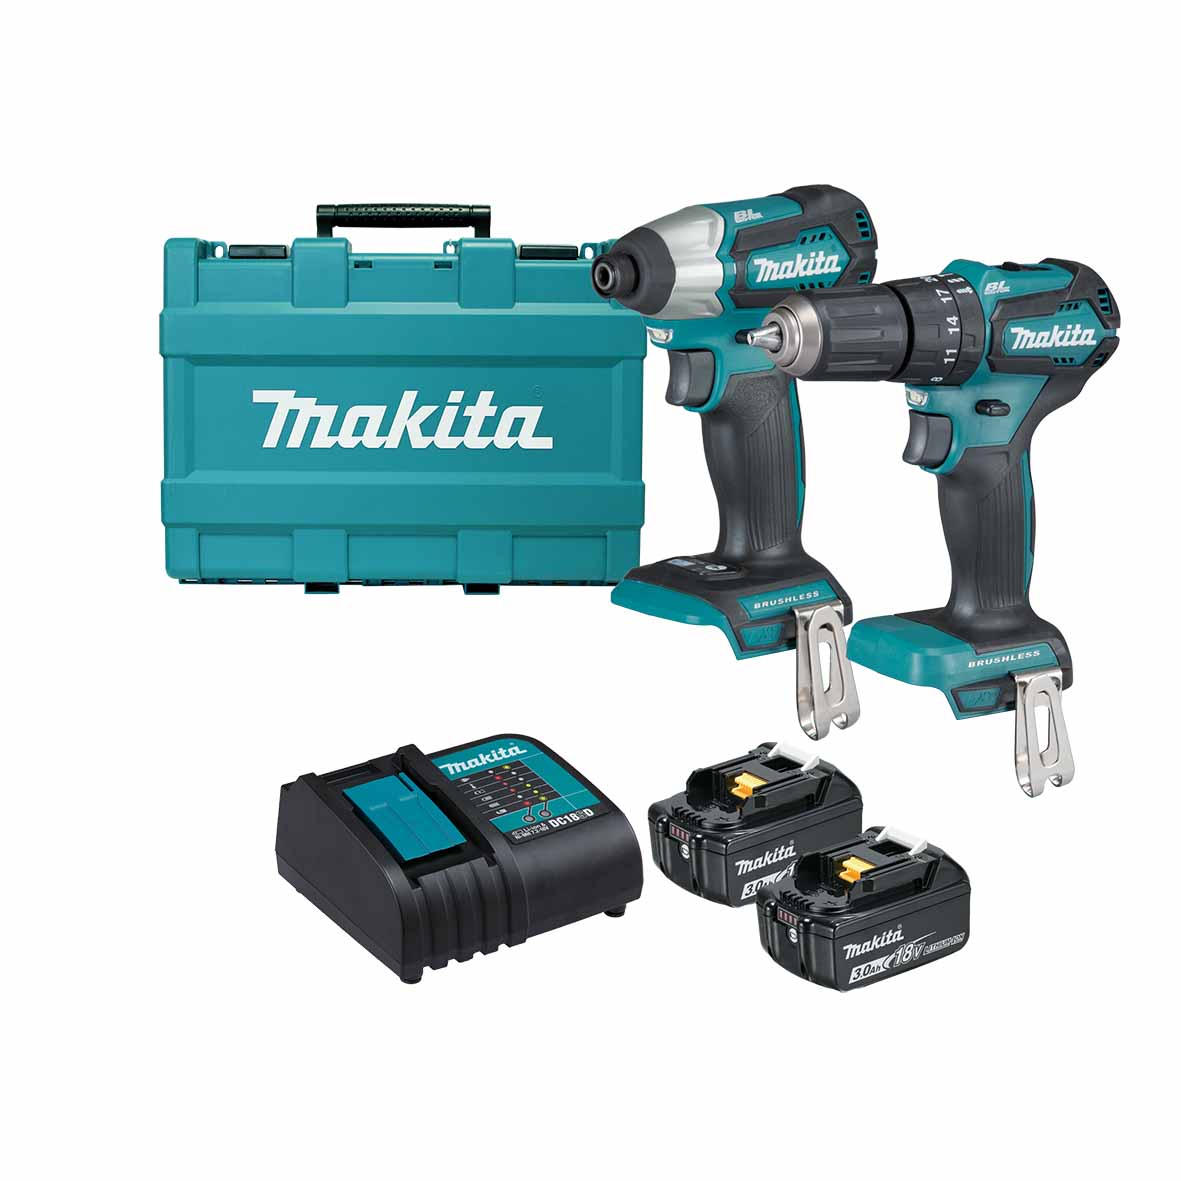 2Pce 18V 3.0Ah Brushless Hammer Drill + Impact Driver Kit DLX2221S by Makita